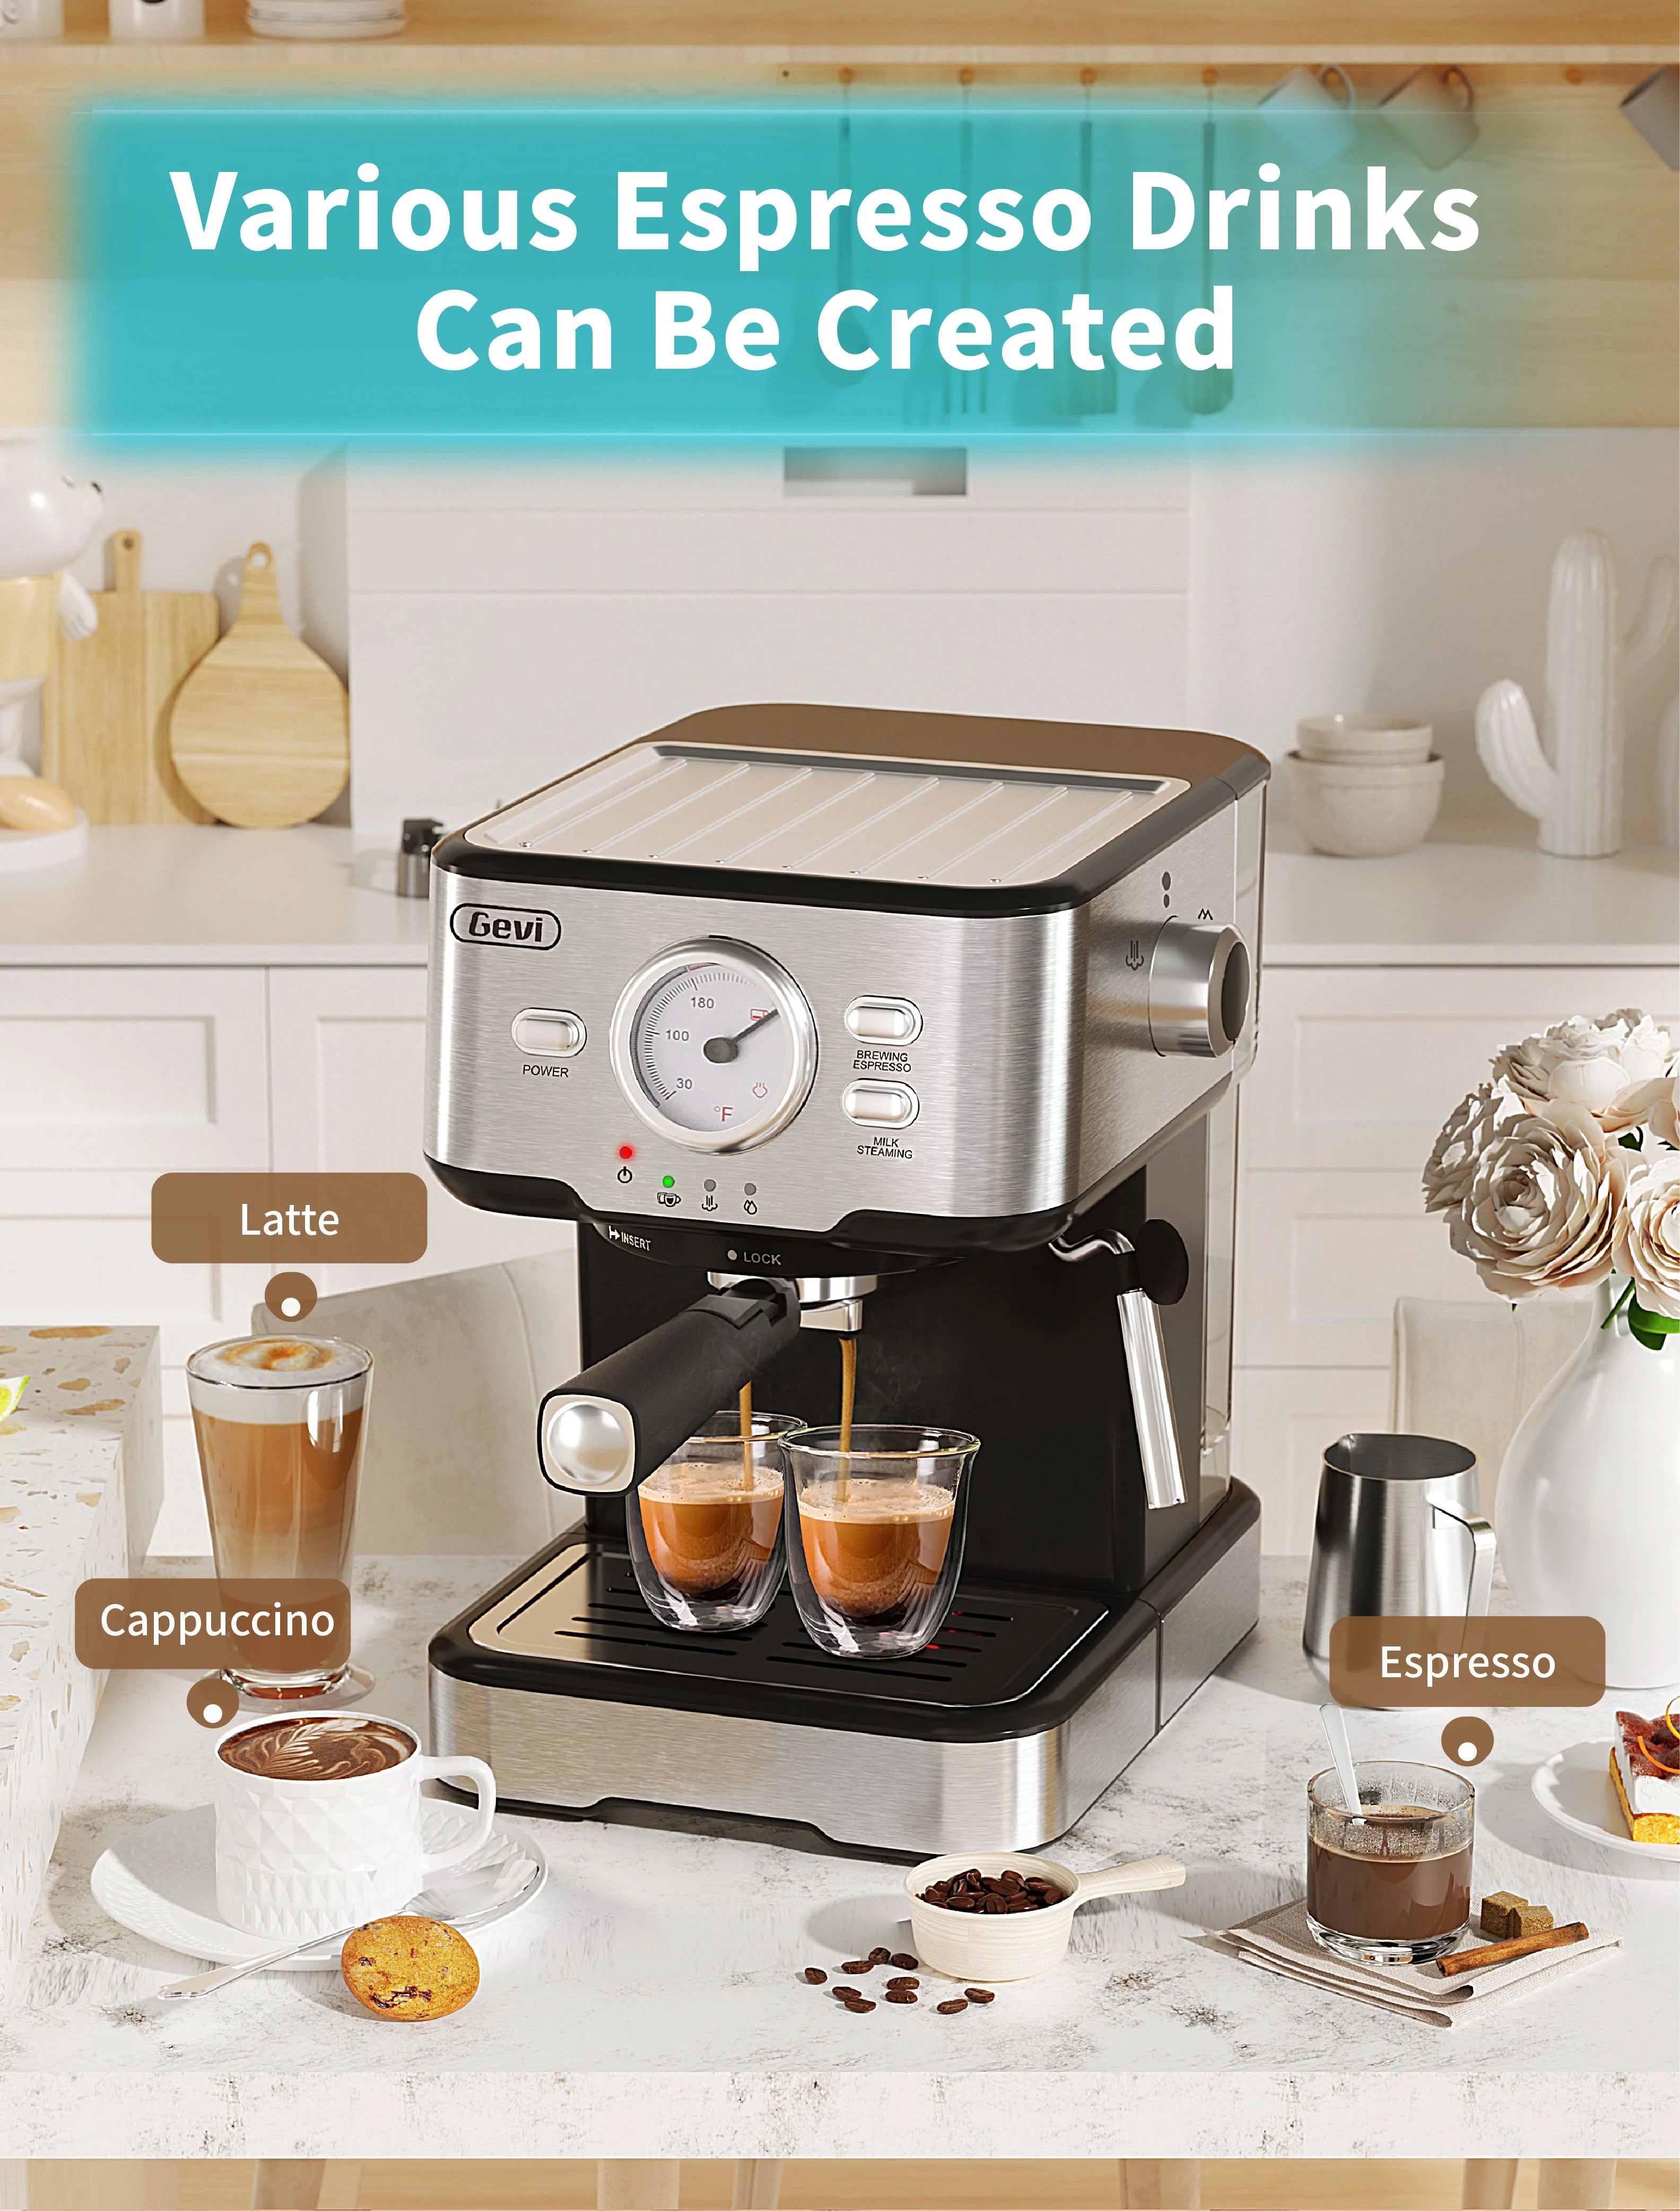 CASABREWS Espresso Machine With Grinder, Professional Espresso Maker With  Milk Frother Steam Wand, Barista Latte Machine With Removable Water Tank  for